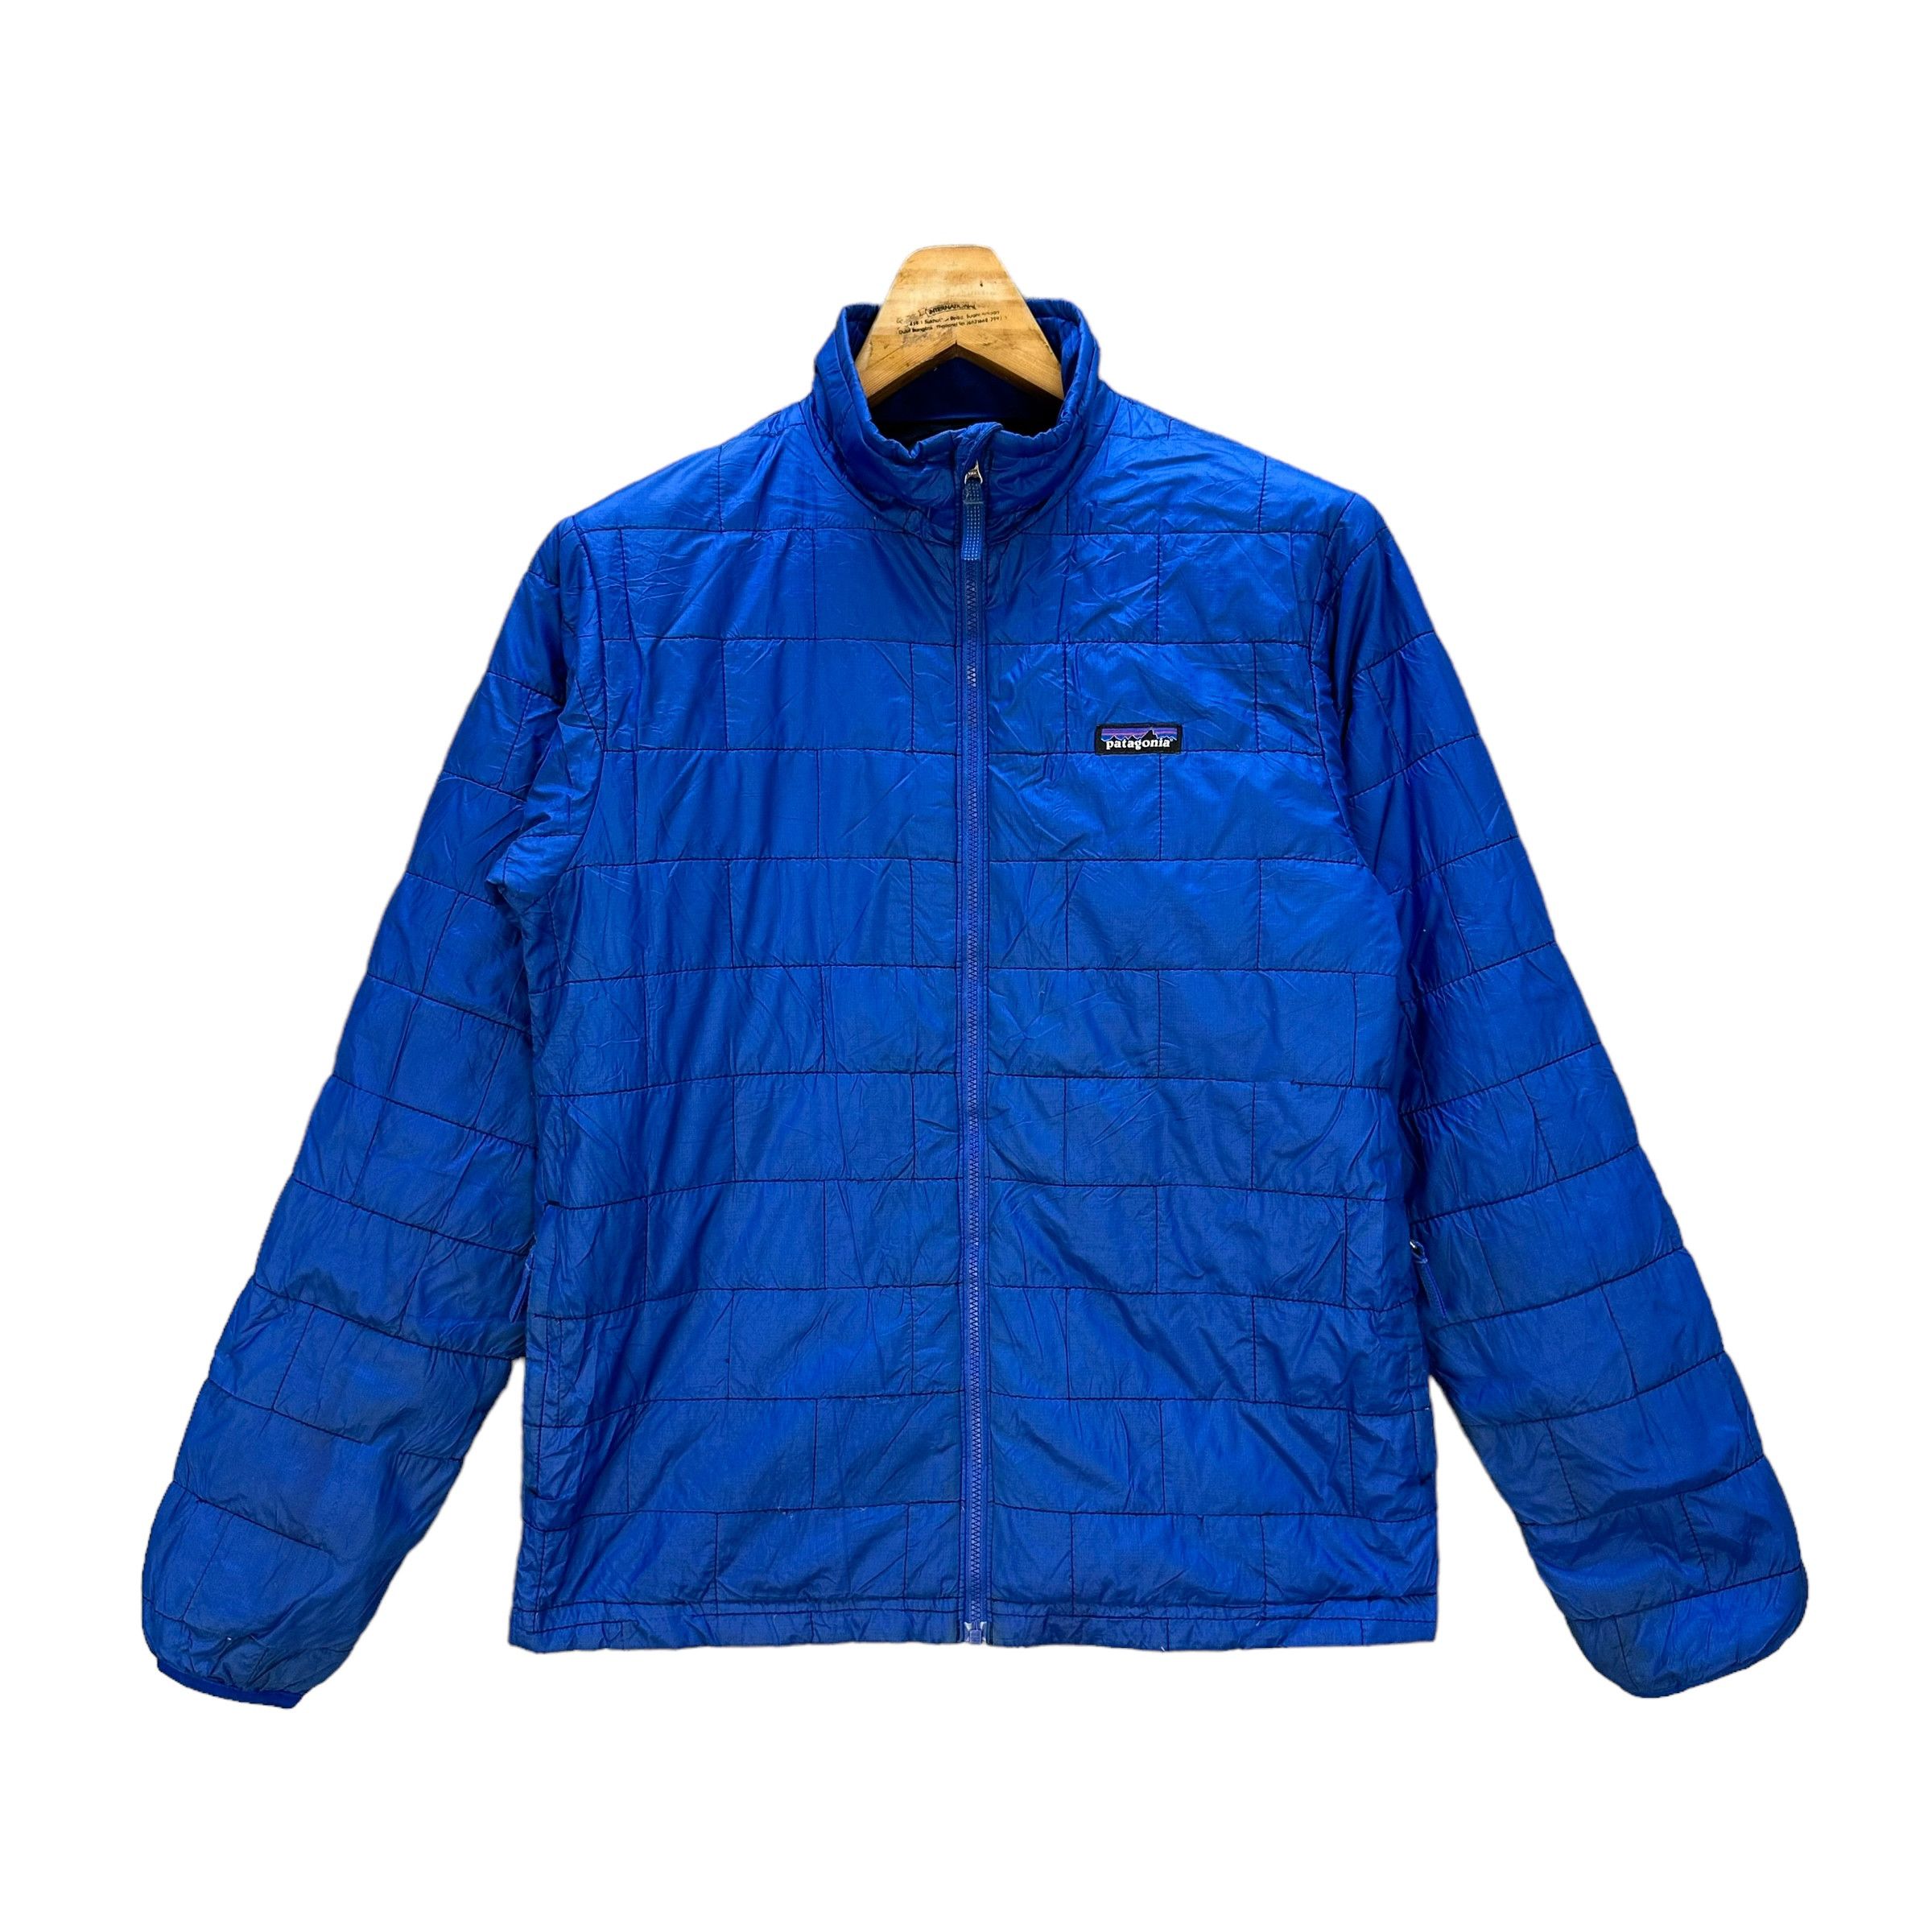 PATAGONIA LIGHT PUFFER JACKET IN BLUE FOR KIDS #9020-48 - 1